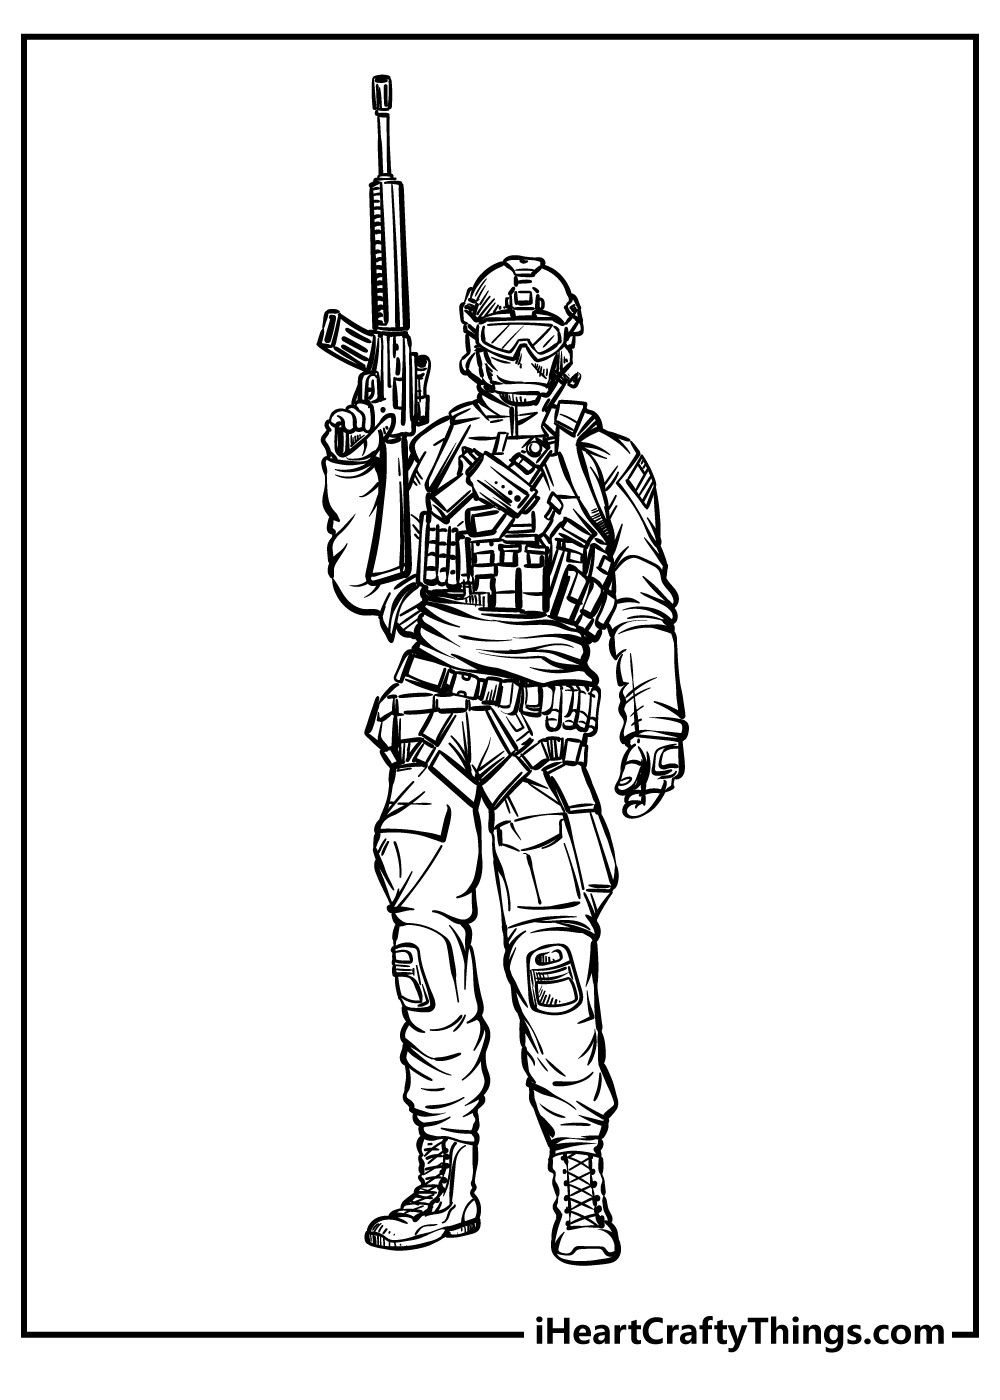 Army Coloring Original Sheet for children free download